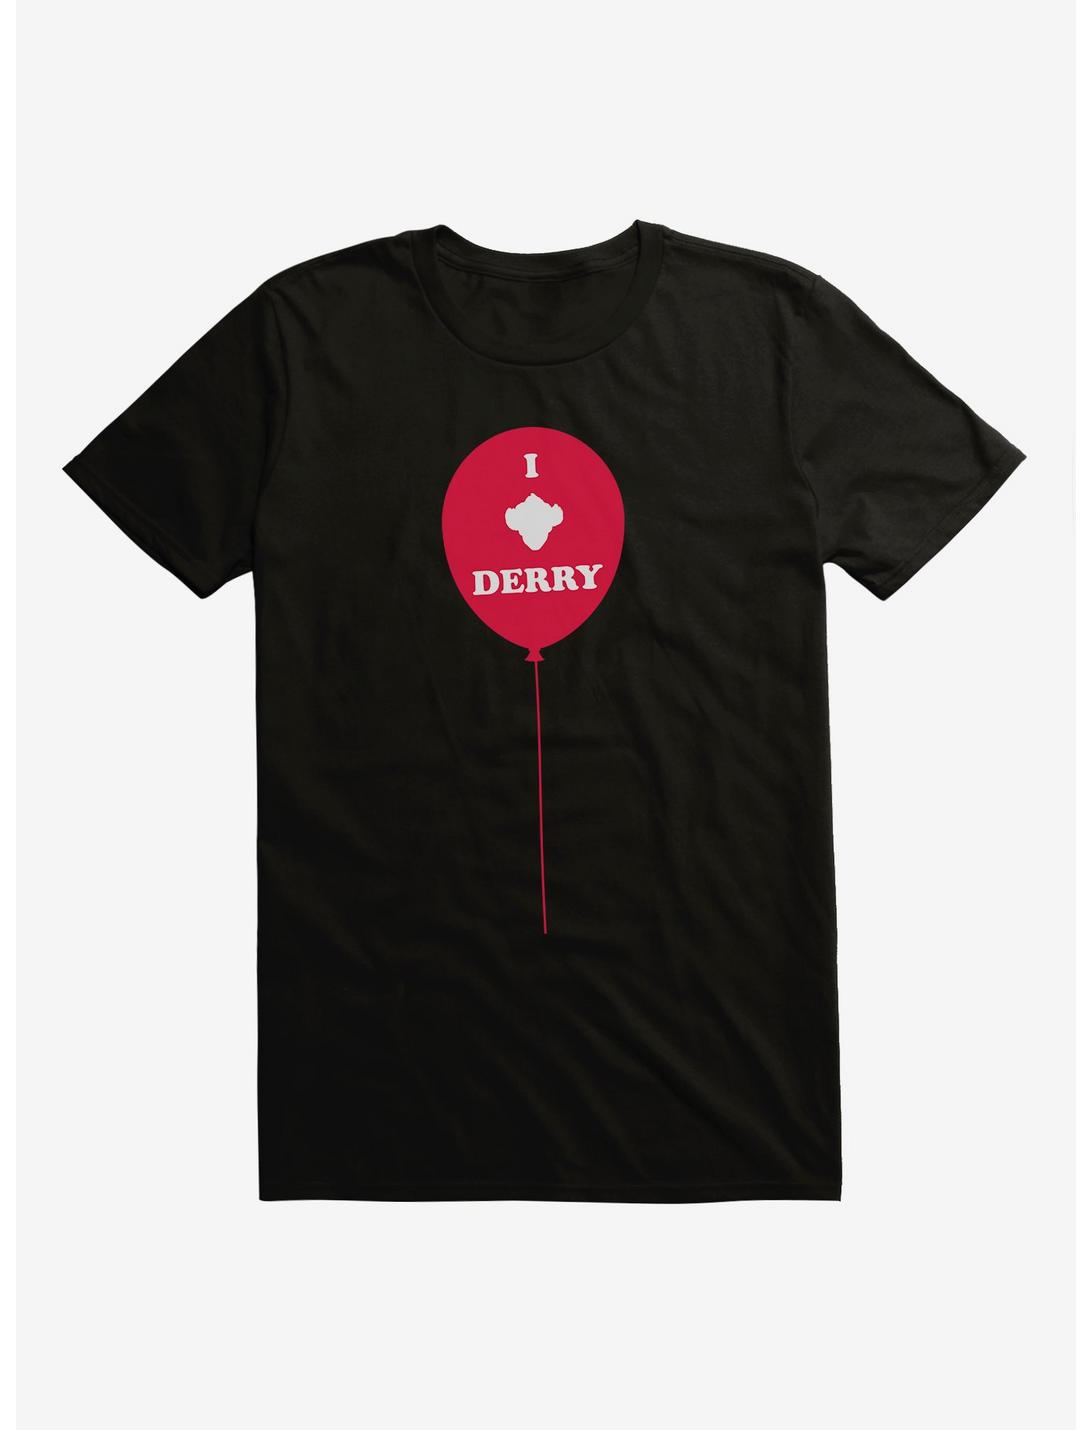 IT Chapter Two I Pennywise Derry Balloon T-Shirt, BLACK, hi-res